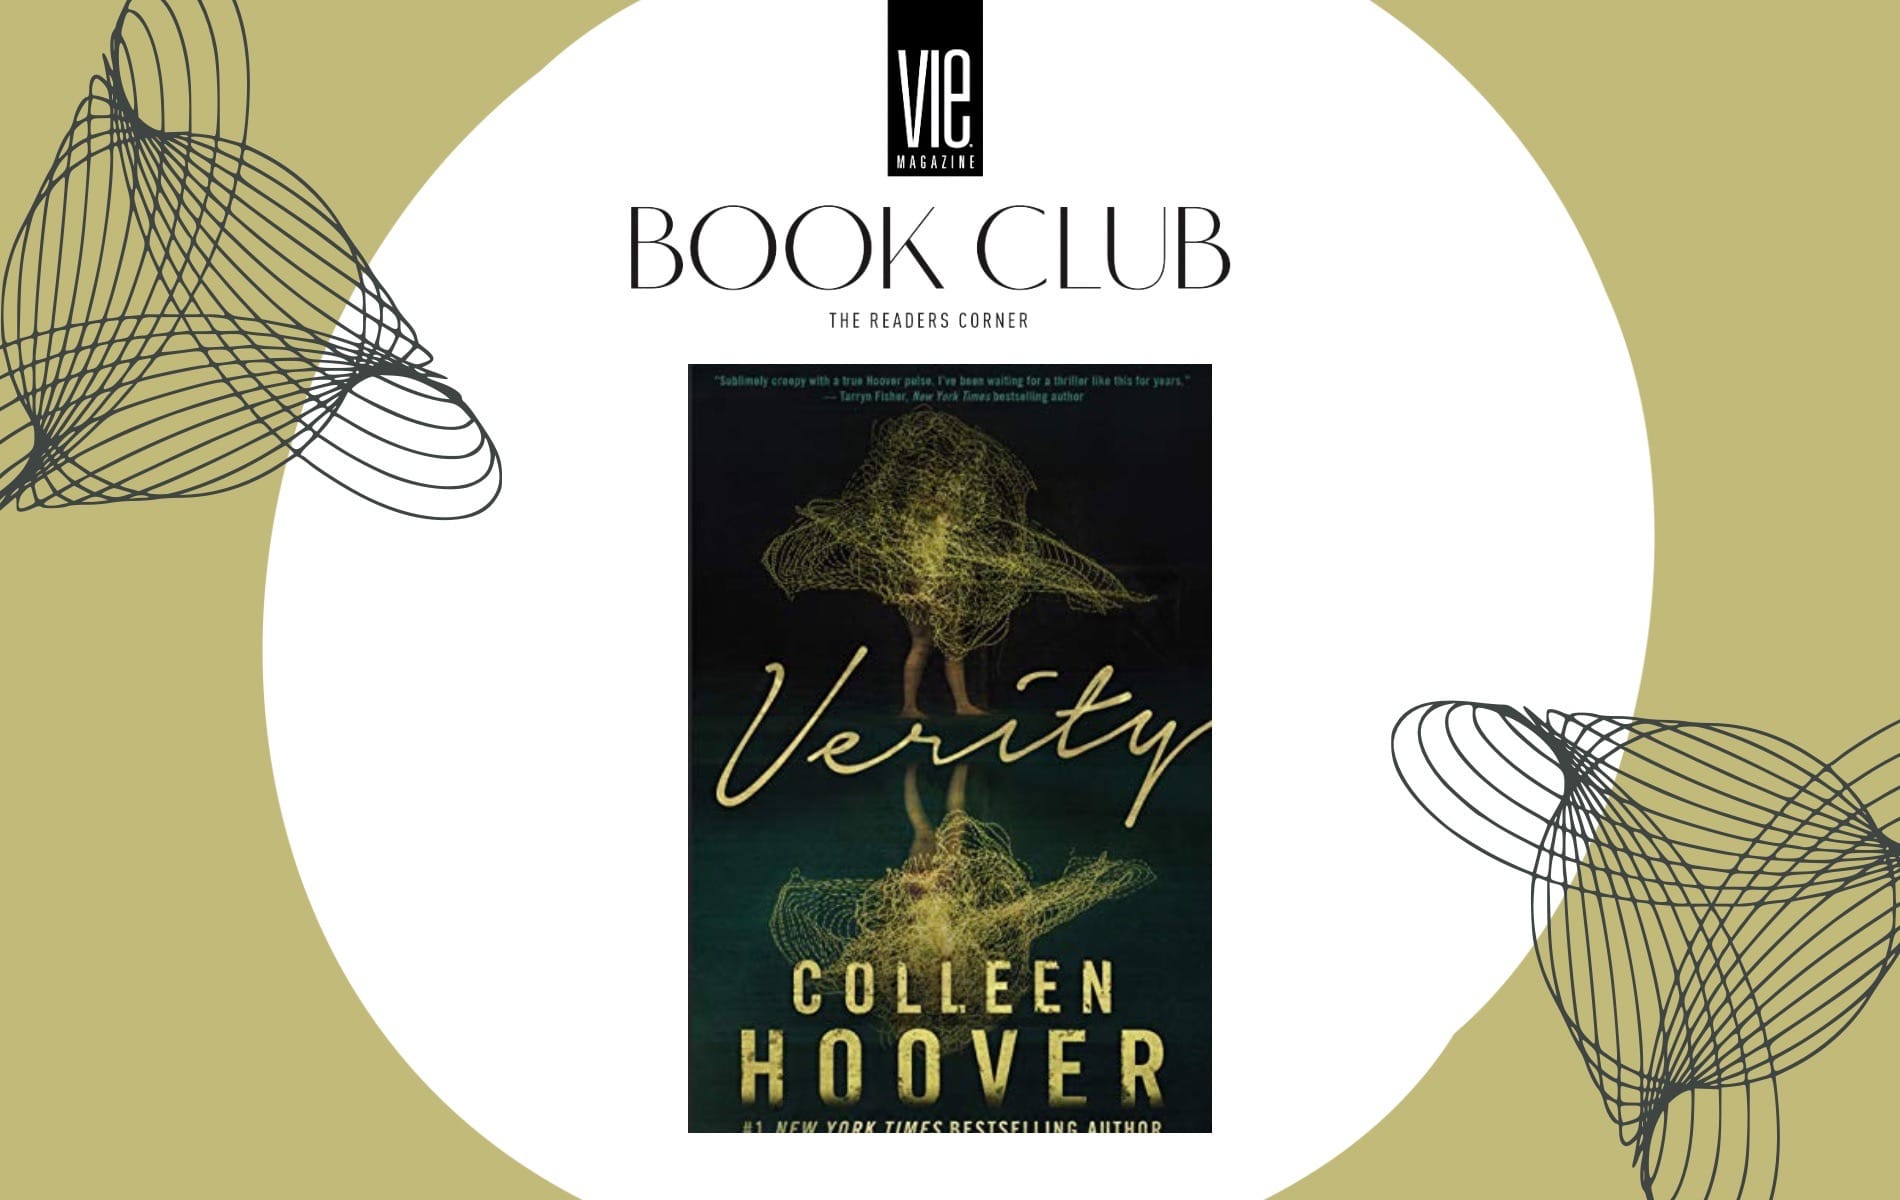 VIE Book Club: Verity by Colleen Hoover